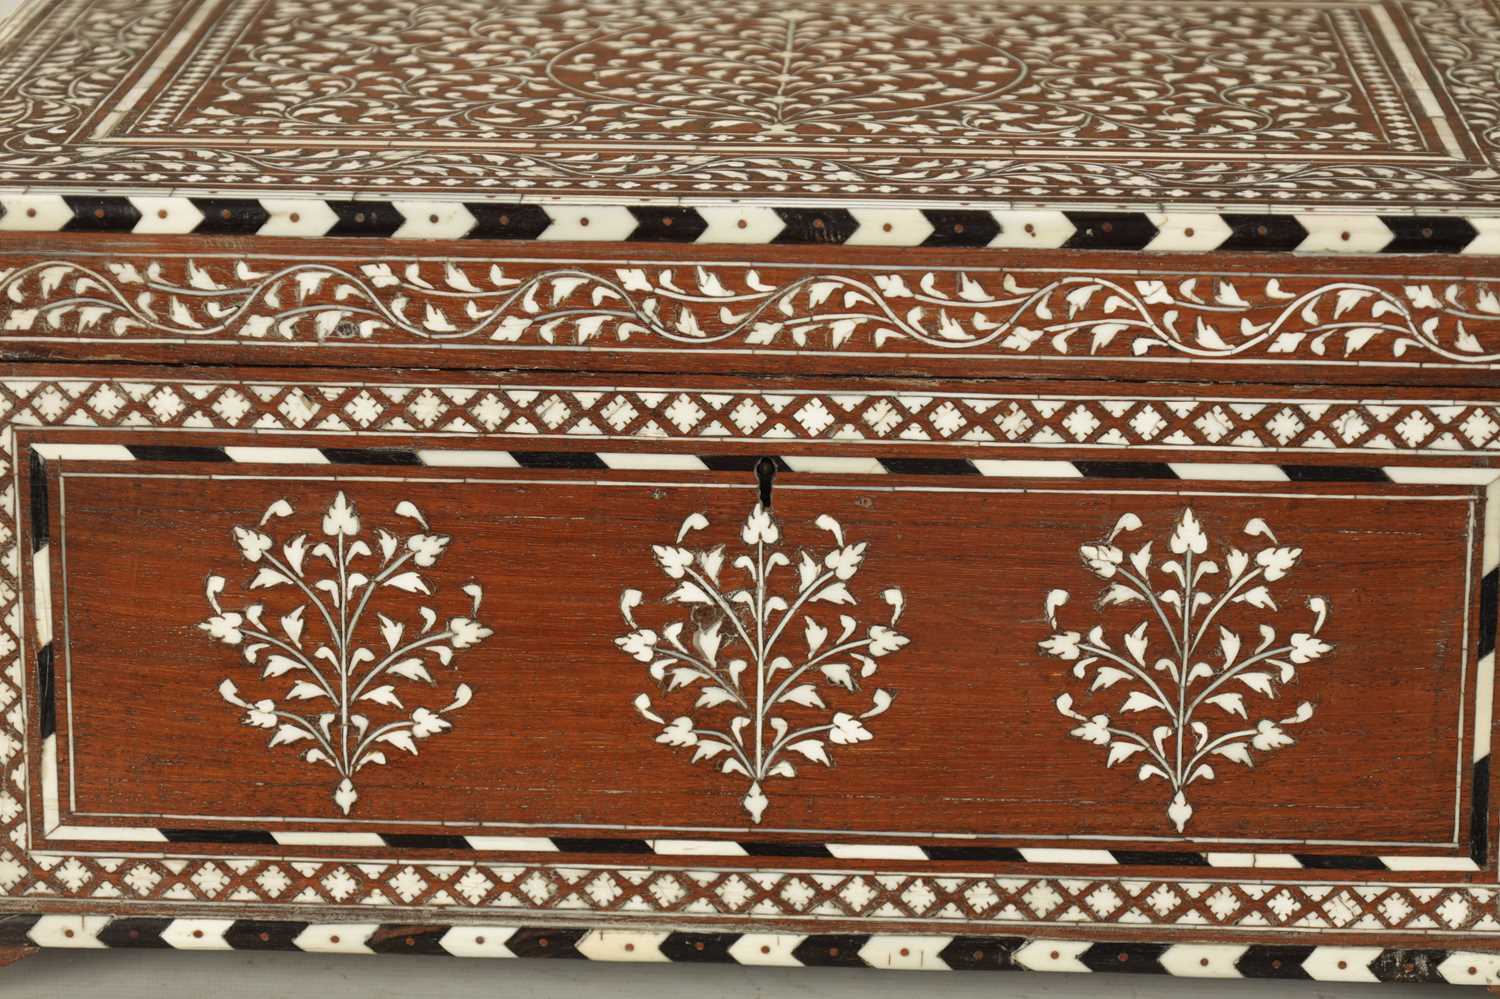 A LARGE LATE 19TH CENTURY ANGLO-INDIAN IVORY AND EBONY INLAID WORKBOX - Image 3 of 10